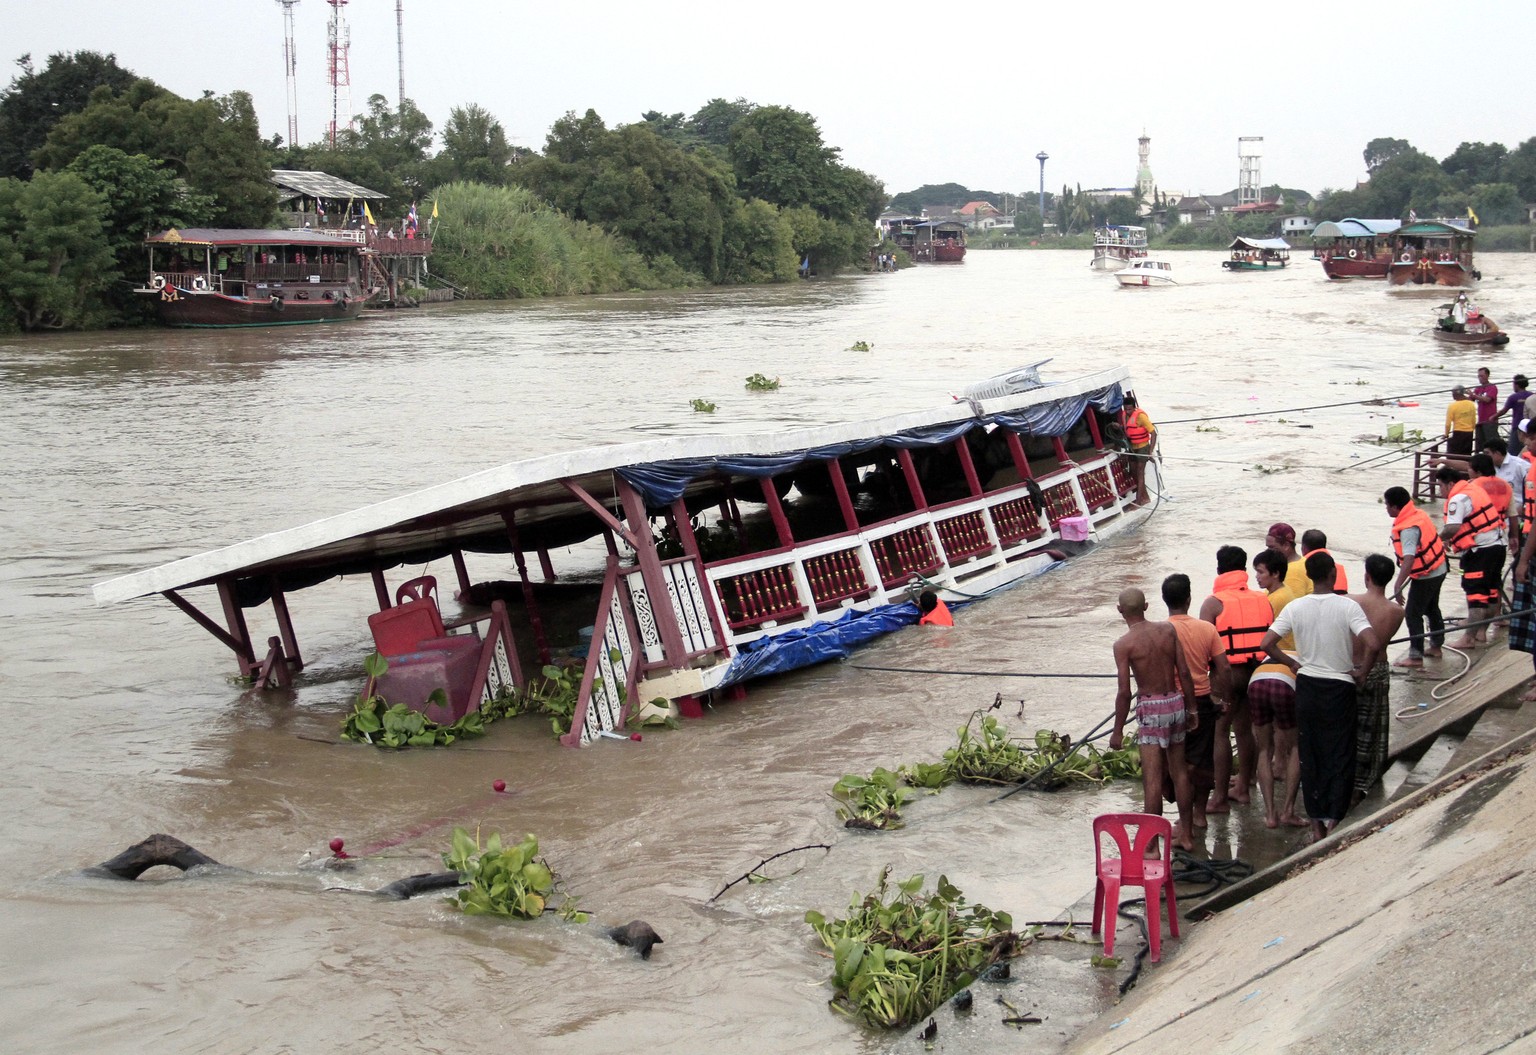 Thai rescue teams search for victims after a boat capsized at Chao Phraya River in Ayuthaya Province, Thailand, Sunday, Sept. 18, 2016. Thai news reports say at least 13 people were killed when a doub ...